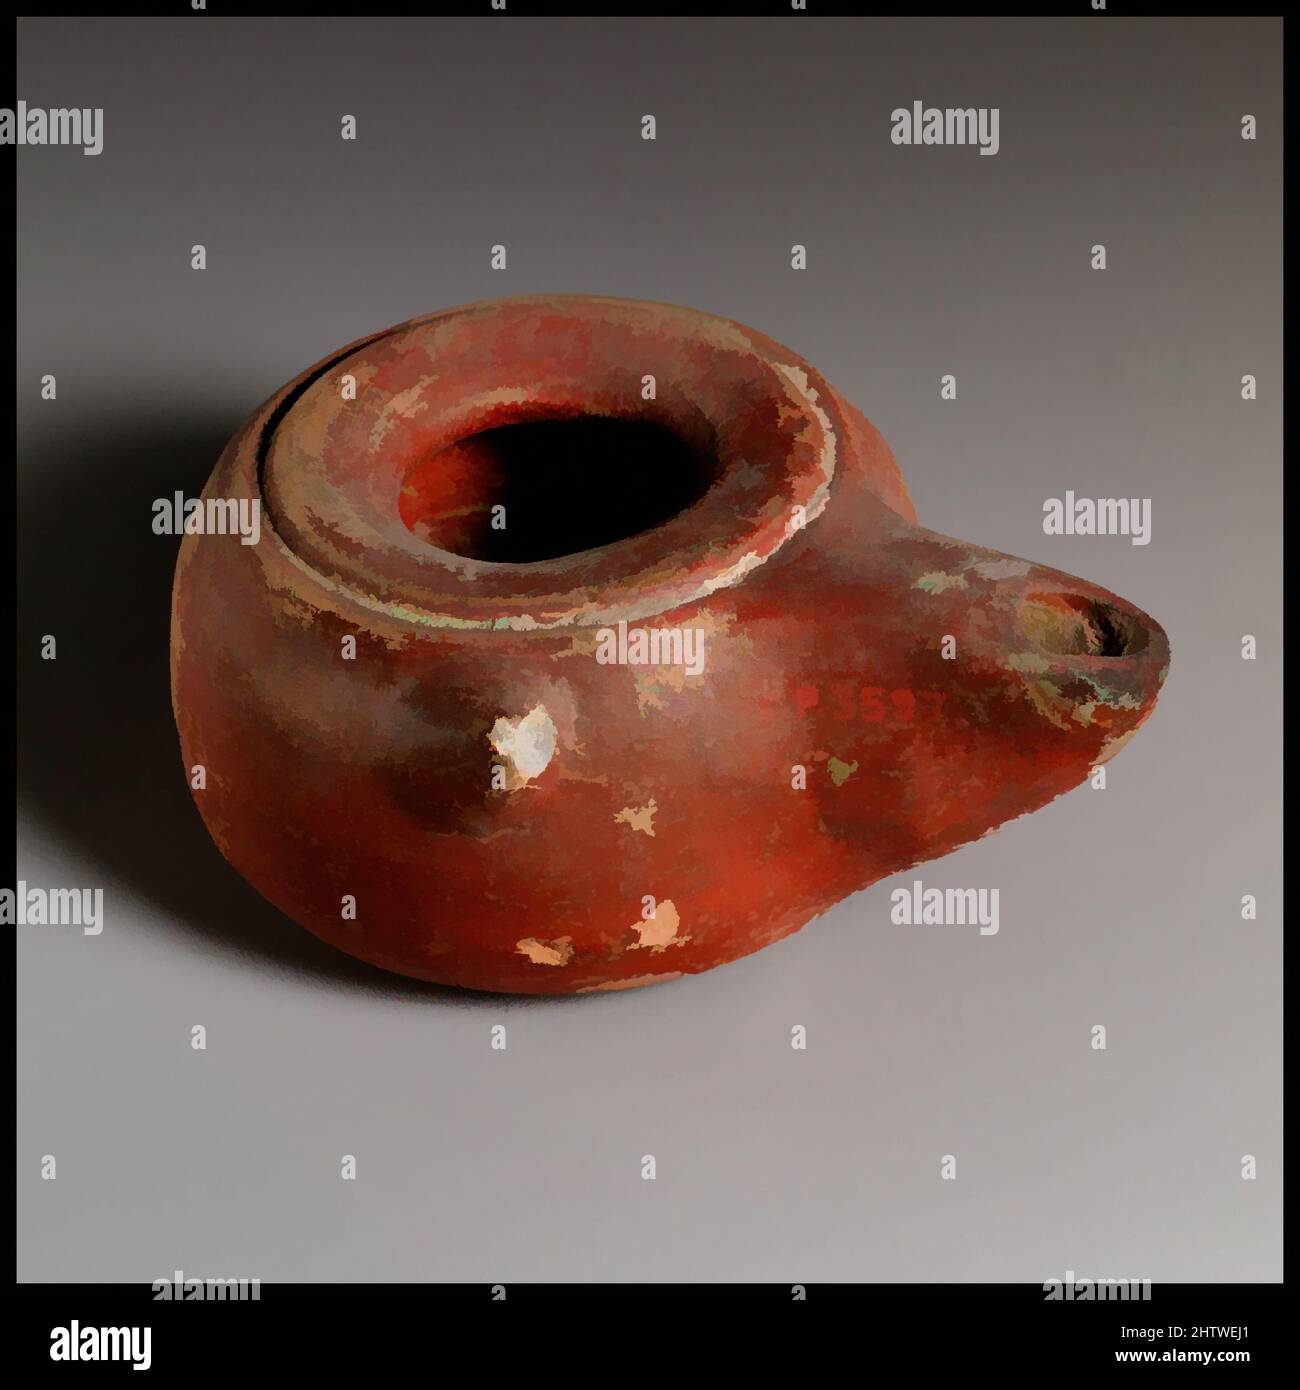 Art inspired by Lamp, Greek or Roman, Terracotta, Overall: 1 1/2 x 3 1/4 in. (3.8 x 8.3 cm), Terracottas, Classic works modernized by Artotop with a splash of modernity. Shapes, color and value, eye-catching visual impact on art. Emotions through freedom of artworks in a contemporary way. A timeless message pursuing a wildly creative new direction. Artists turning to the digital medium and creating the Artotop NFT Stock Photo